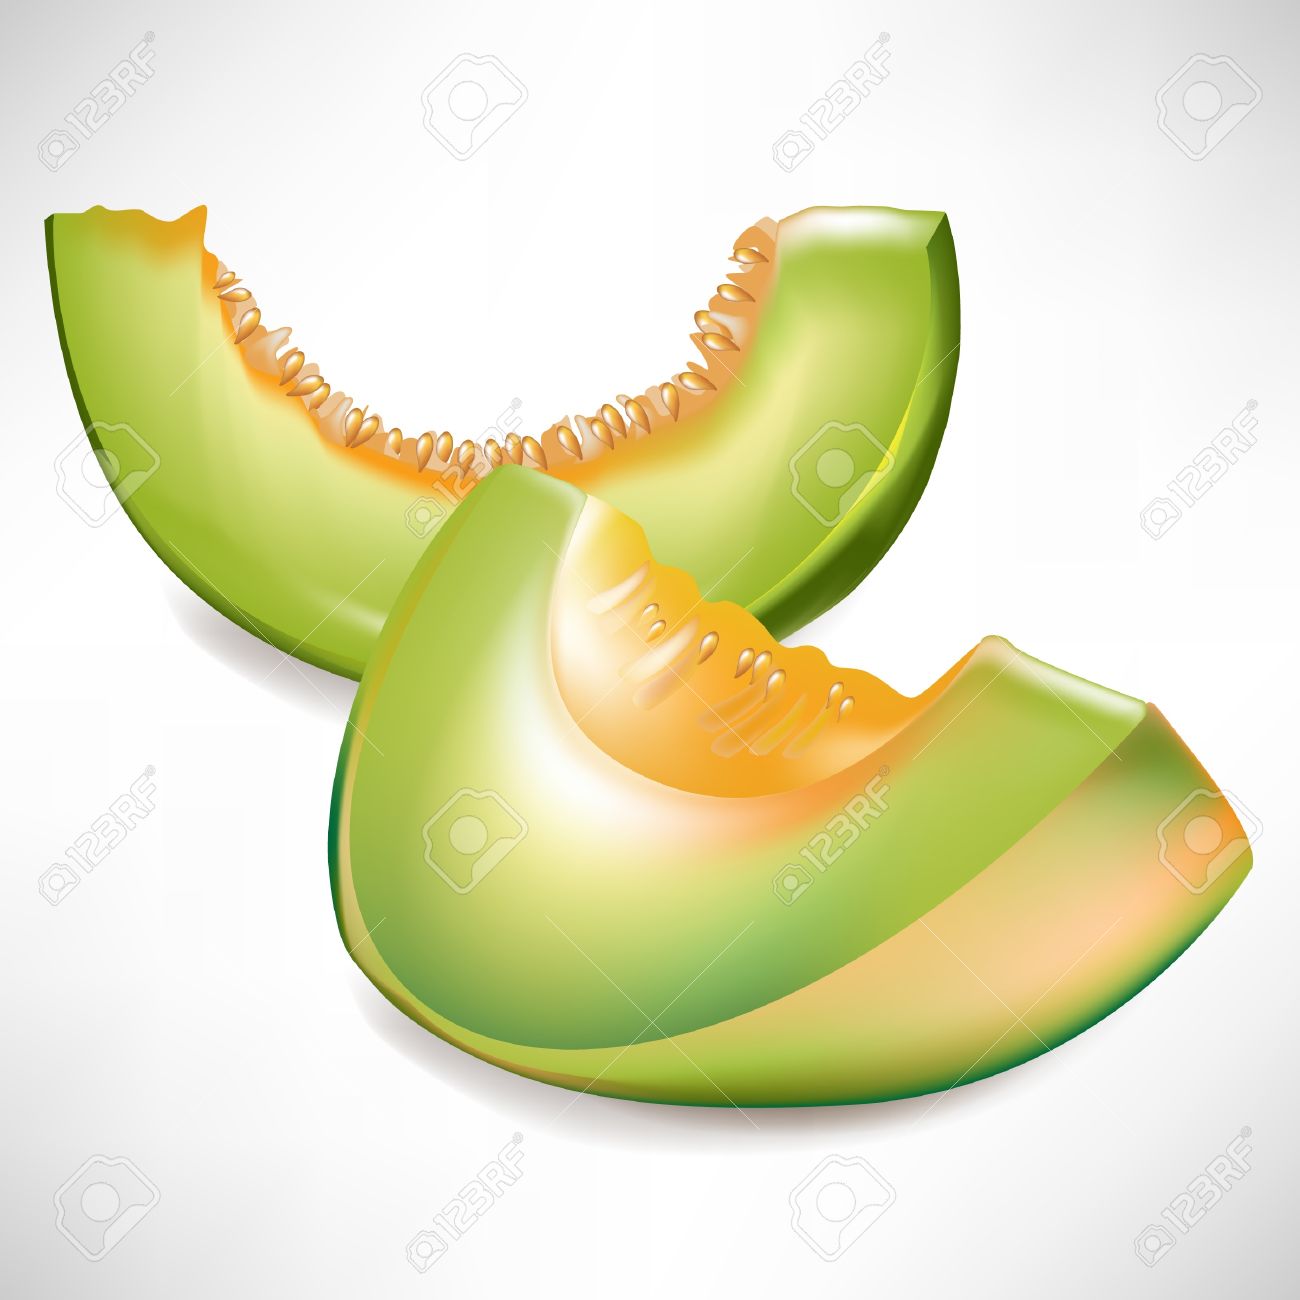 Honey Dew Melon clipart #6, Download drawings